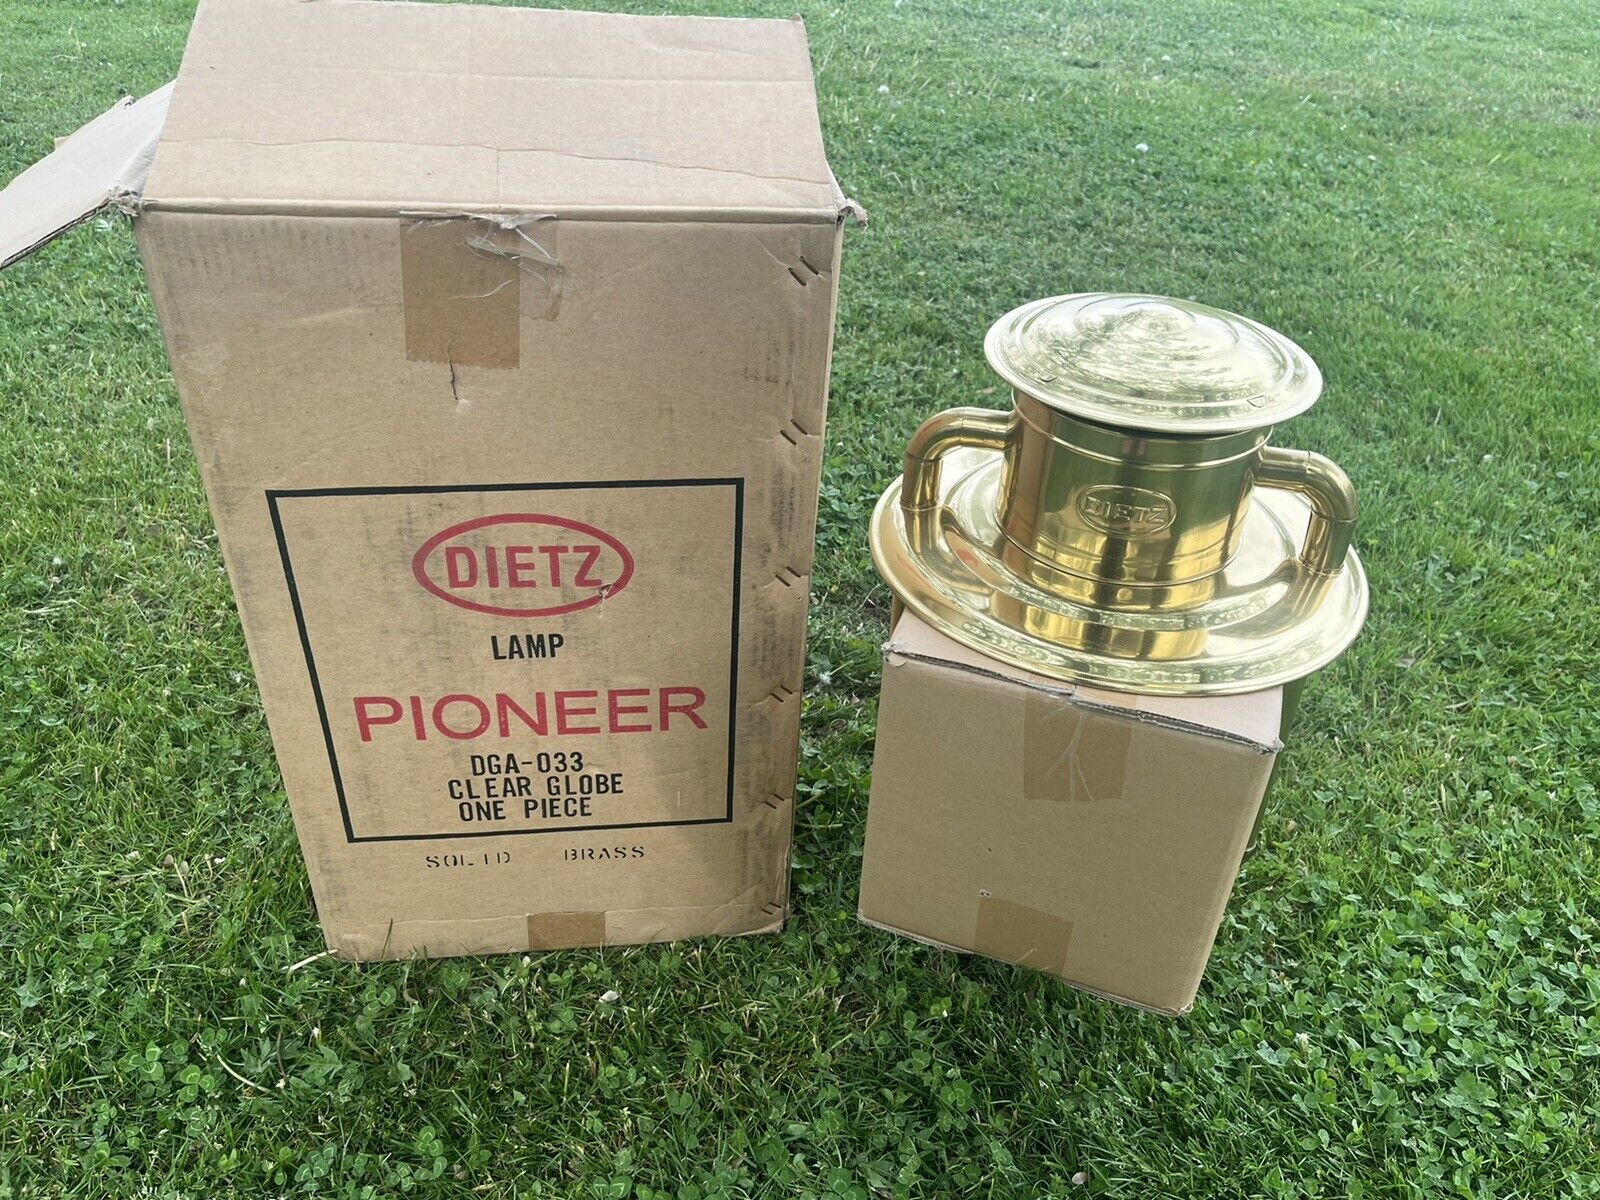 New Old Stock Vintage Brass Dietz Pioneer Electric Street Lamp In Box